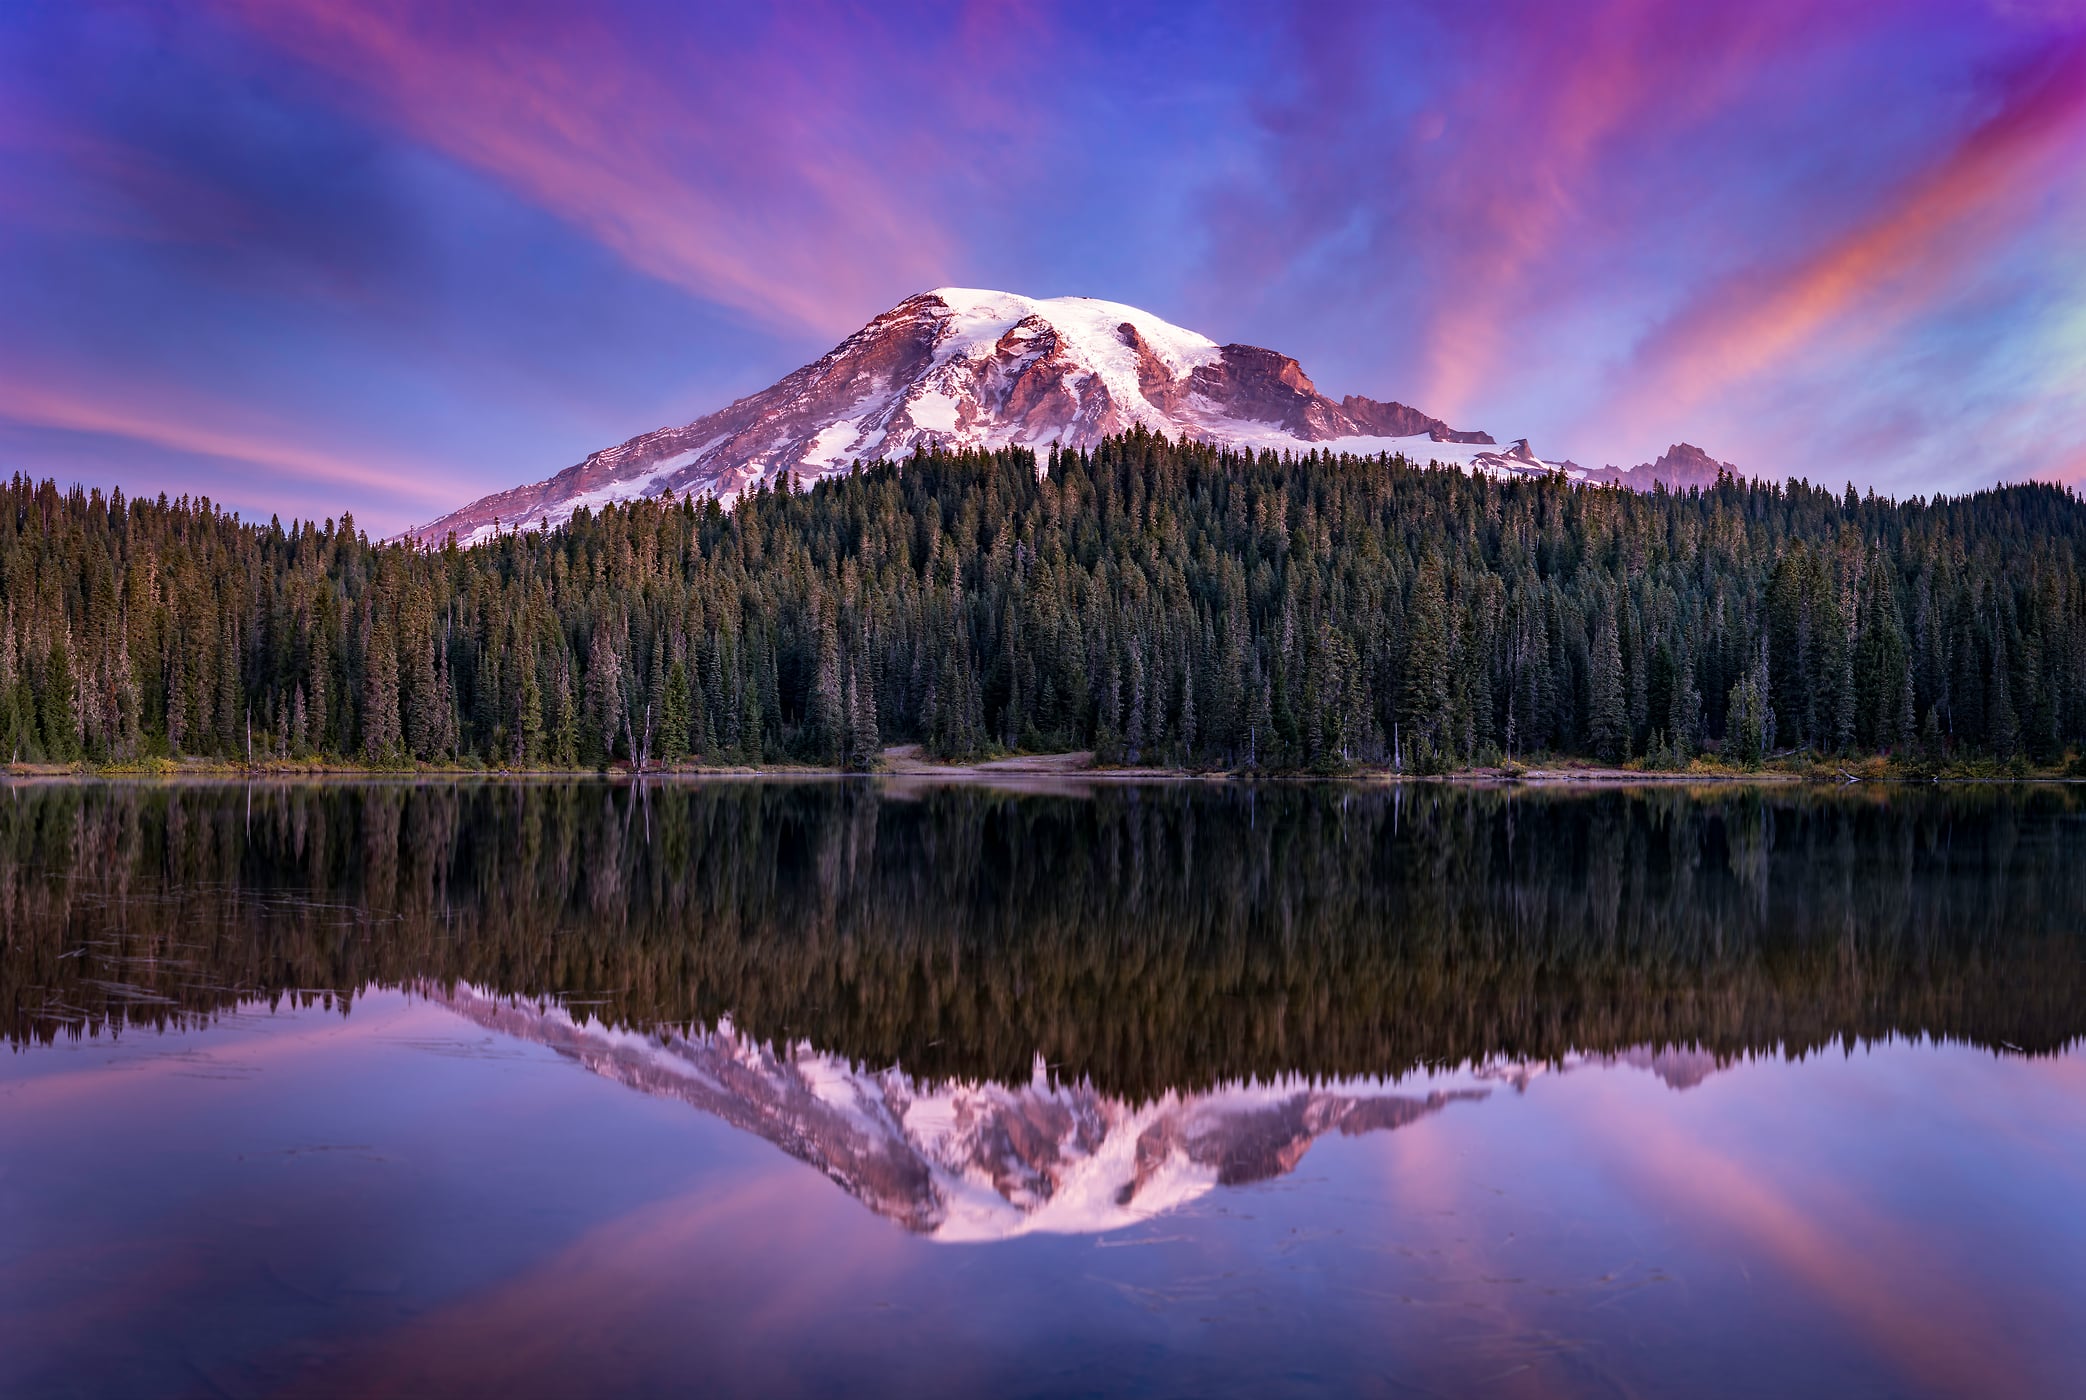 333 megapixels! A very high resolution, large-format VAST photo print of Mount Rainier at sunrise with a forest and lake reflecting the mountain; landscape photo created by Justin Katz at Reflection Lake in Mount Rainier National Park, Washington.